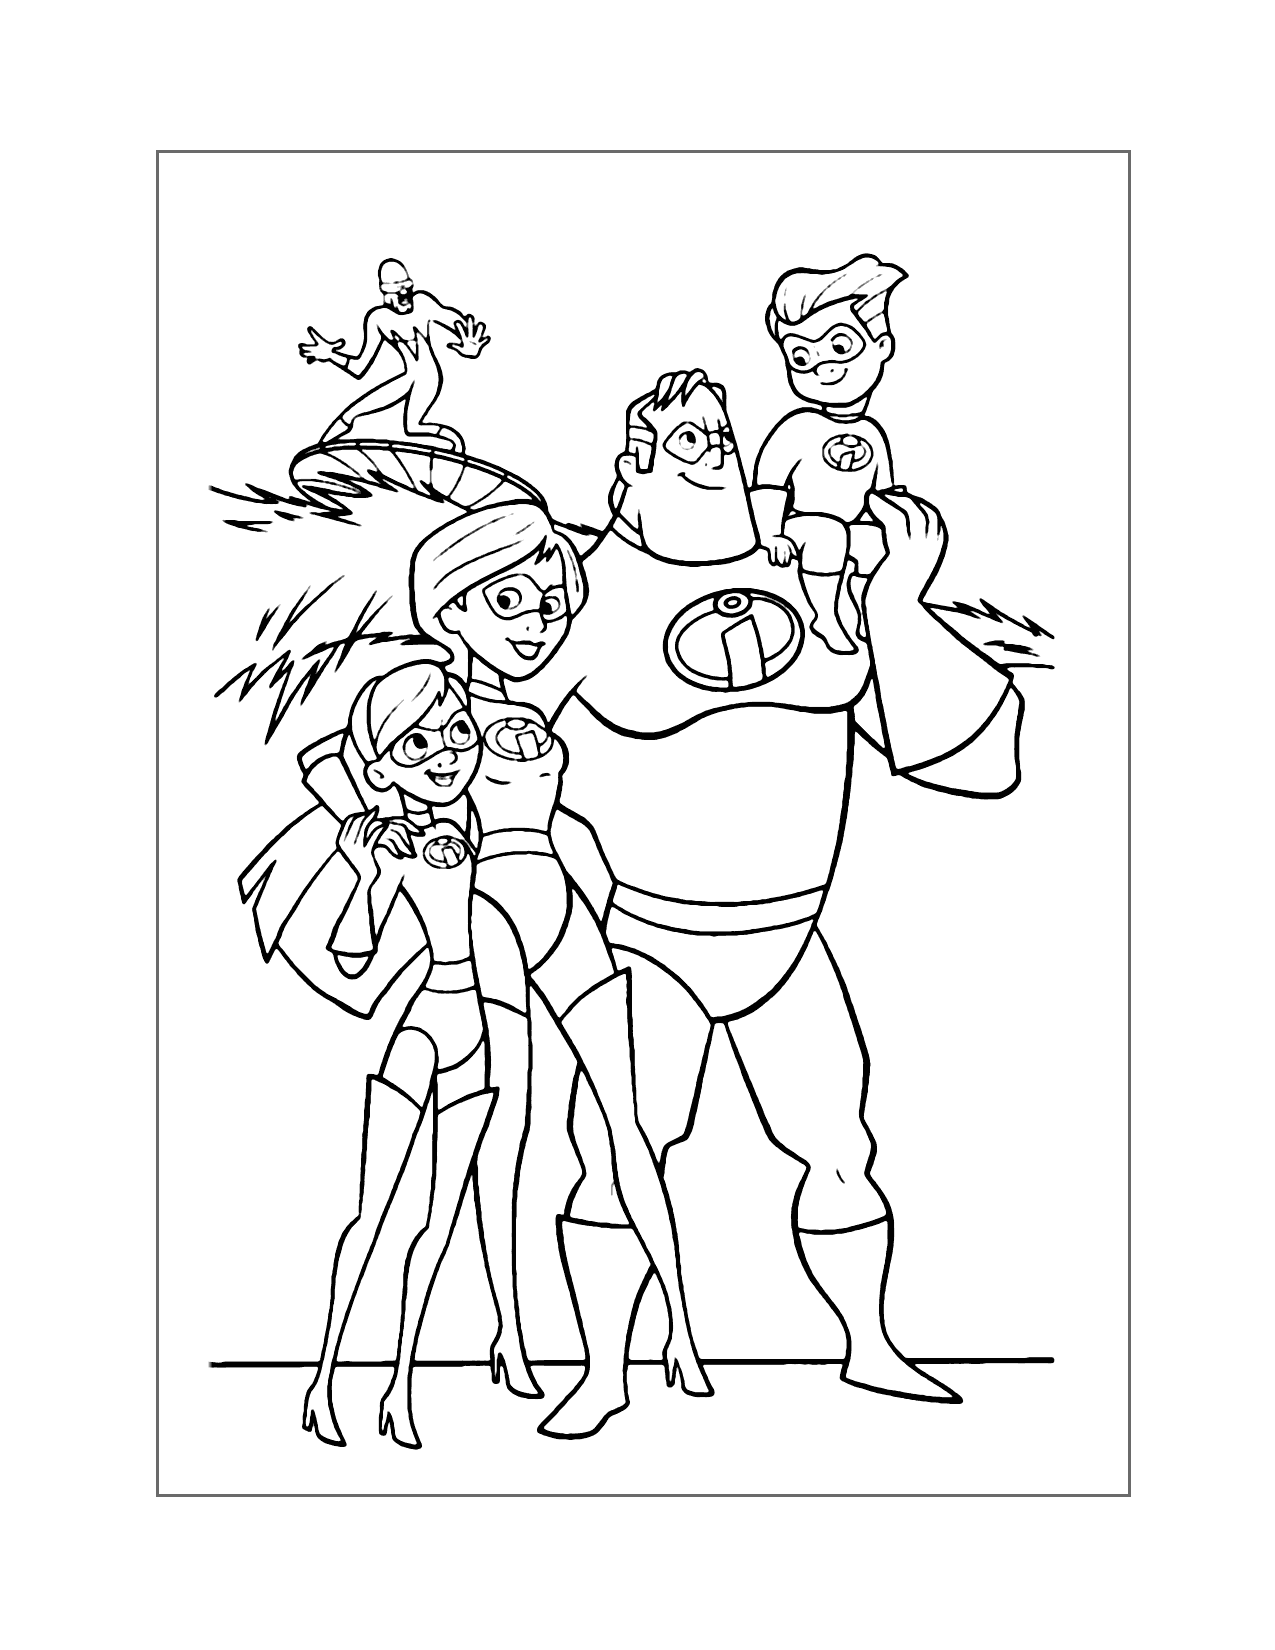 The Incredibles Movie Coloring Page